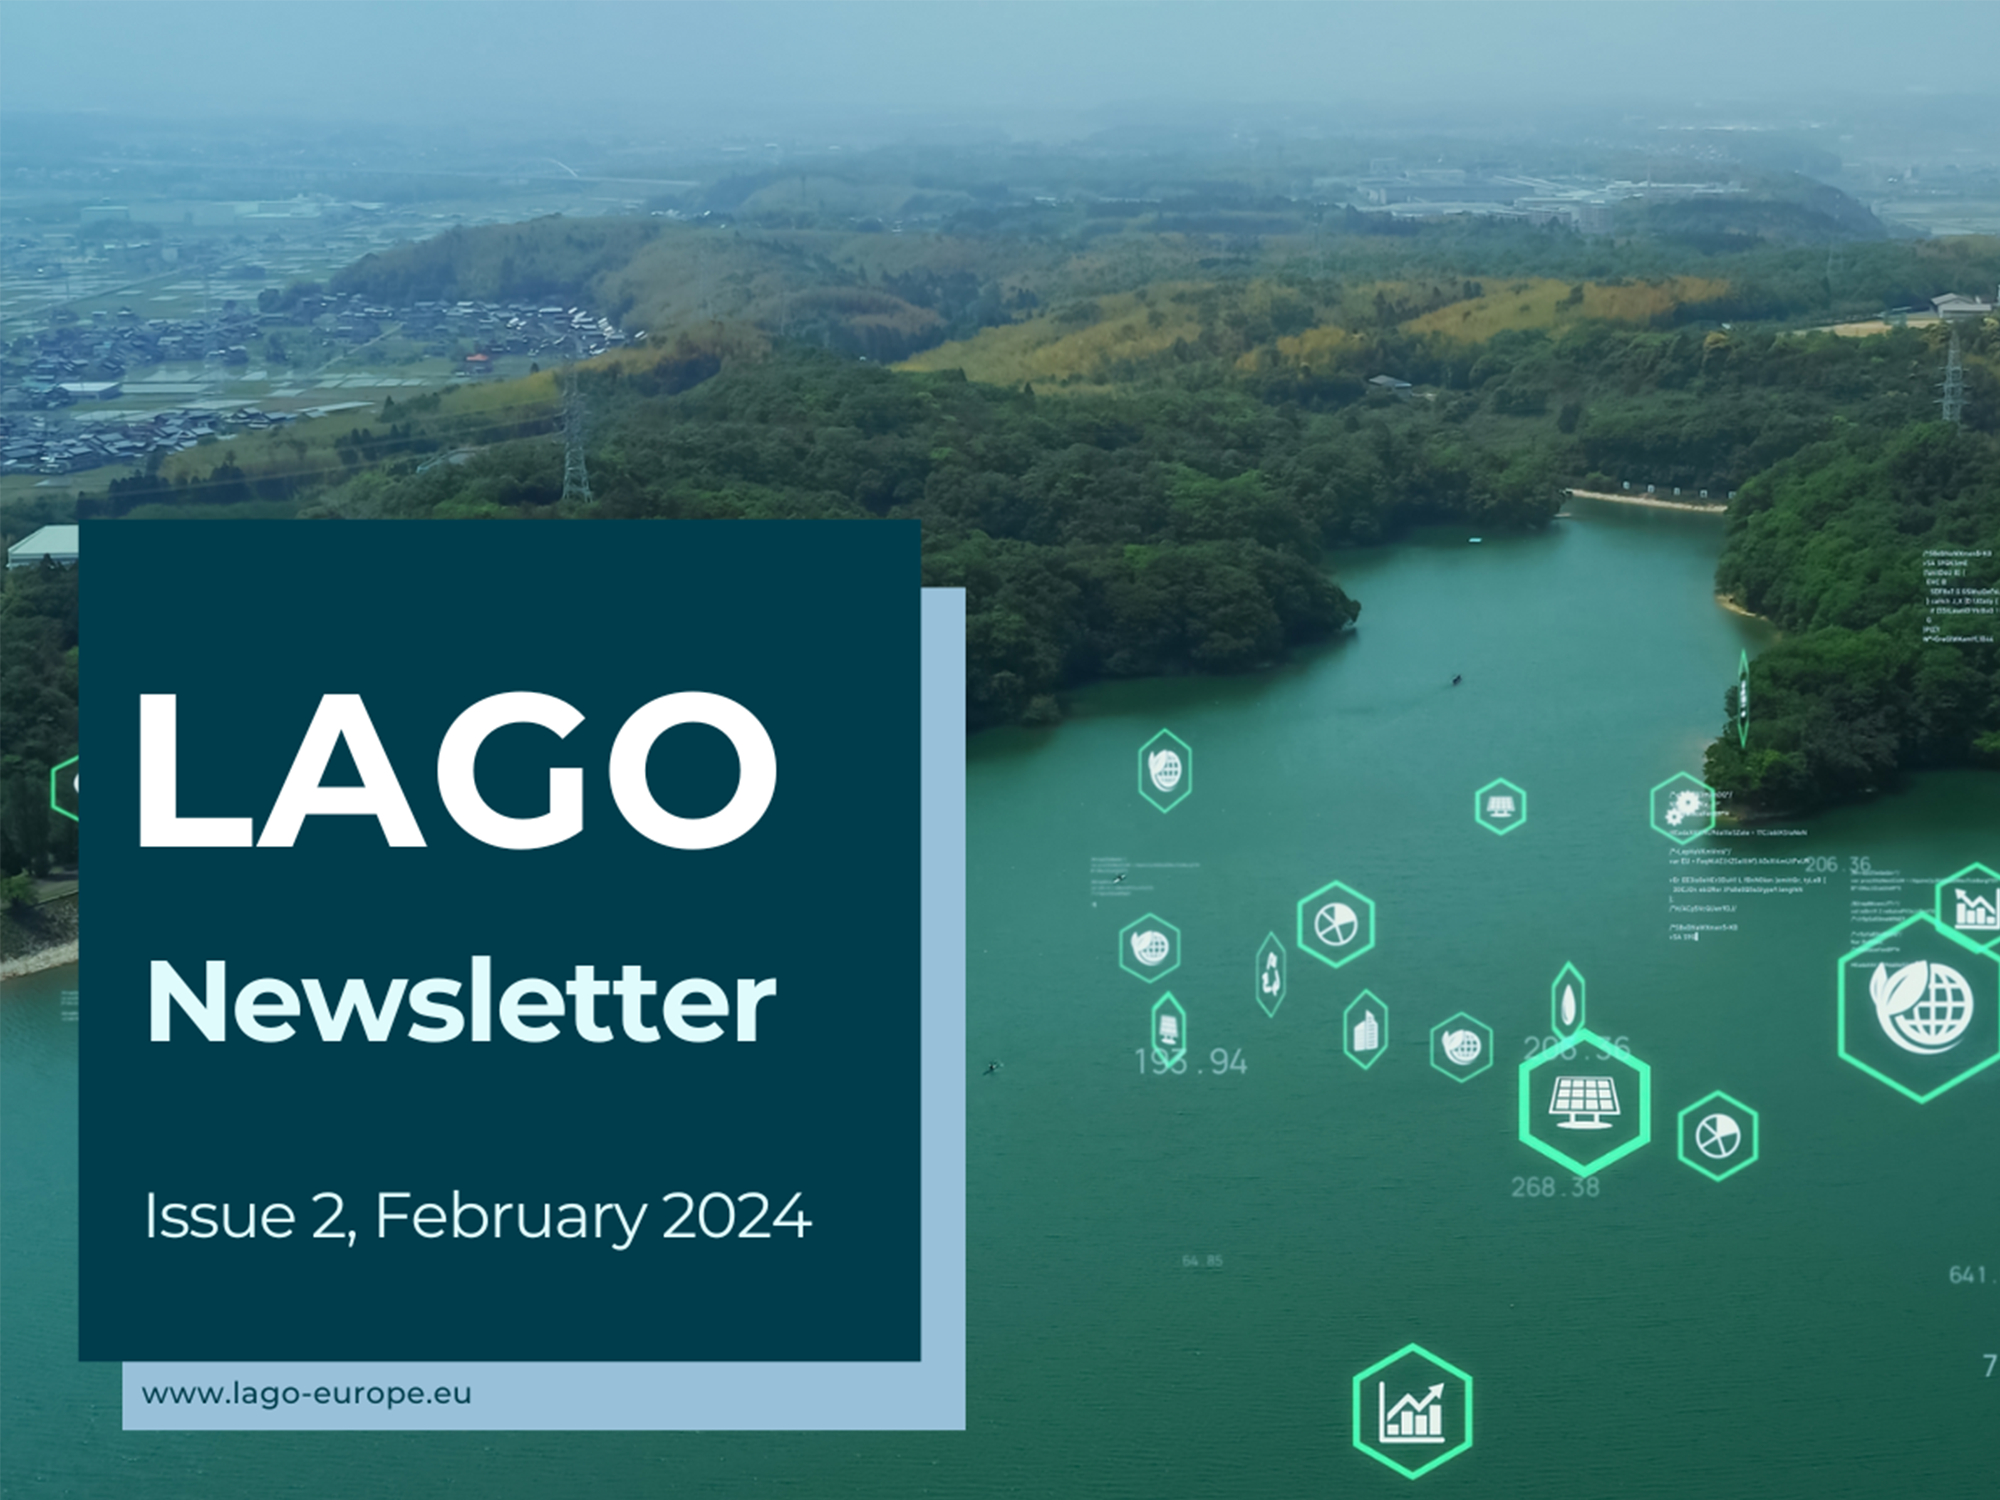 Second Edition of the LAGO Newsletter